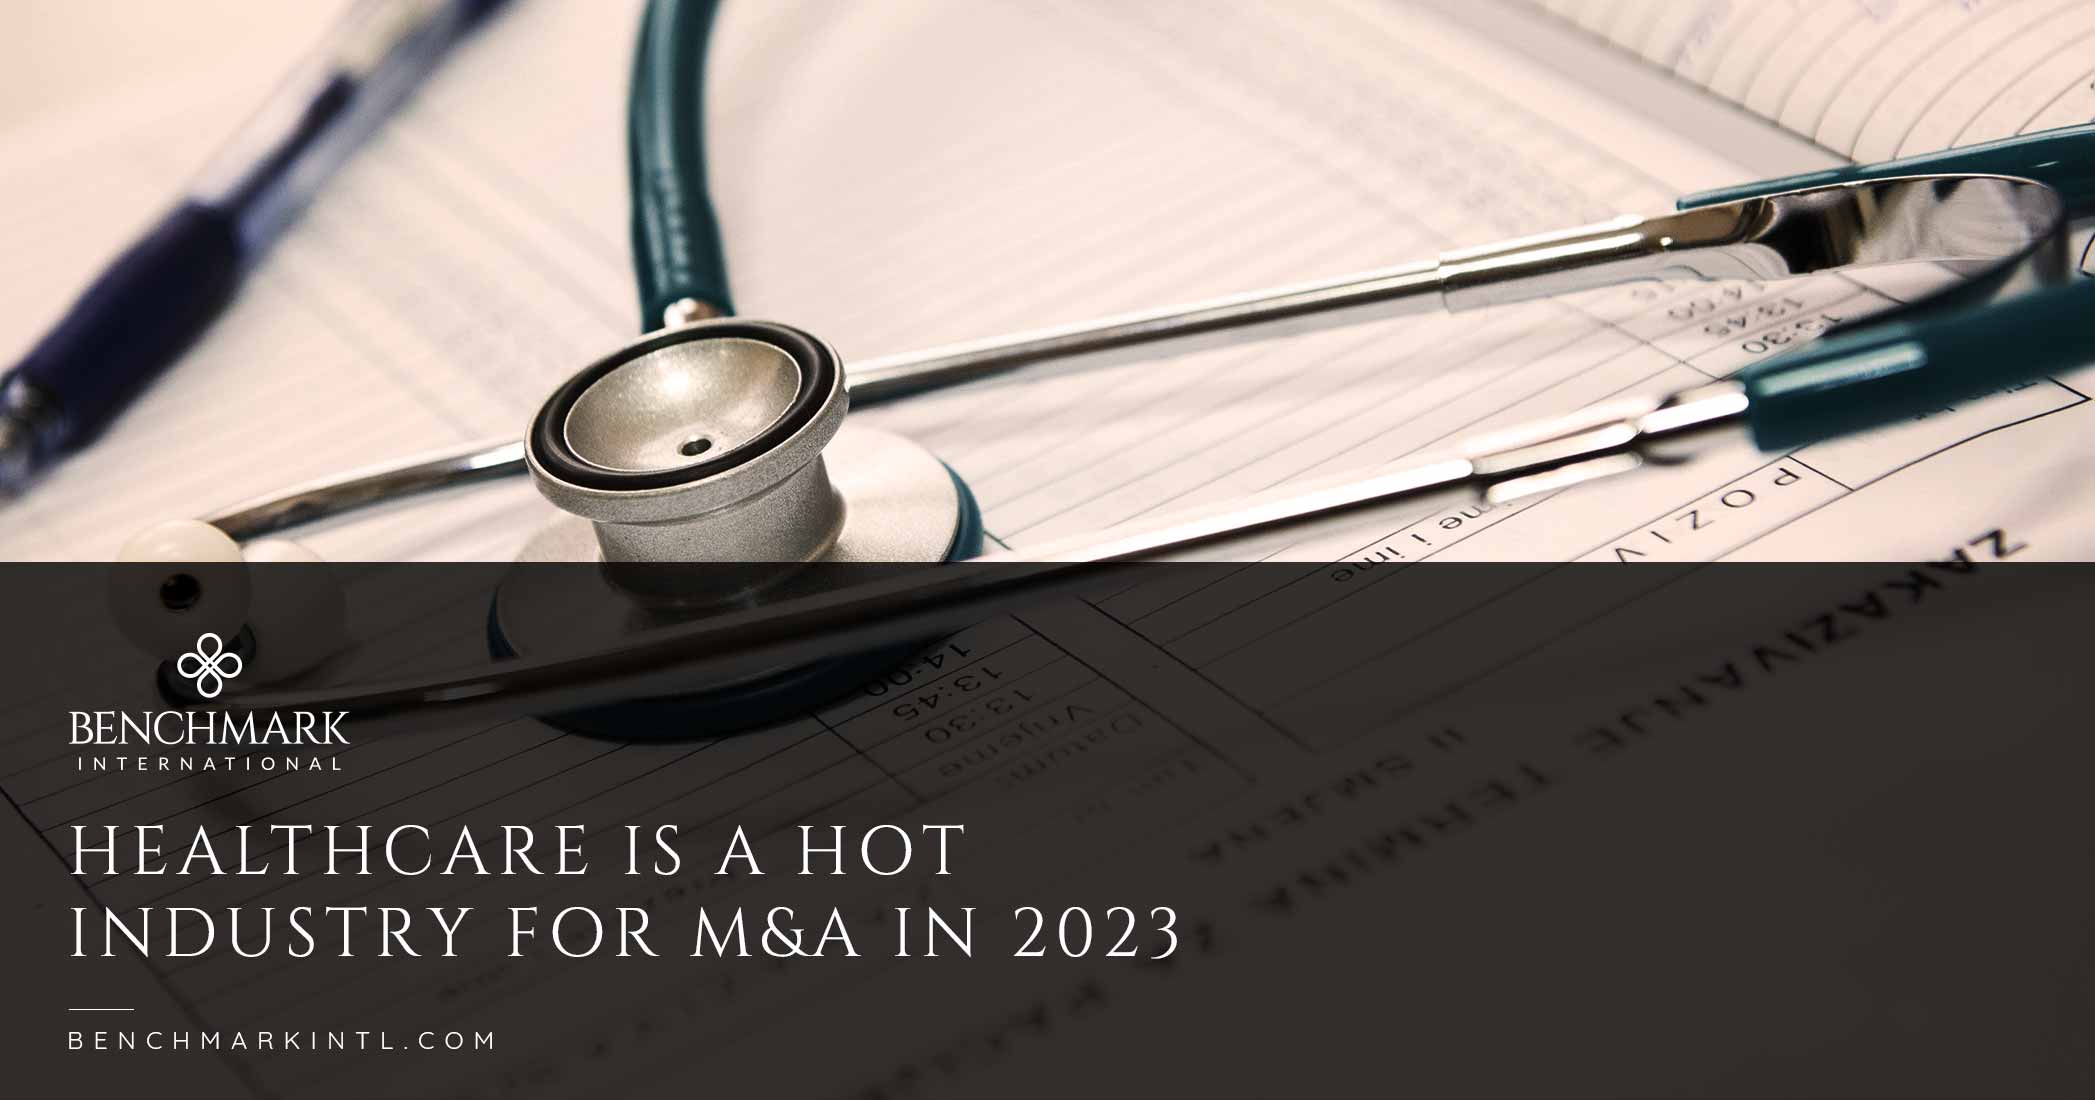 Healthcare Is A Hot Industry For M&A In 2023